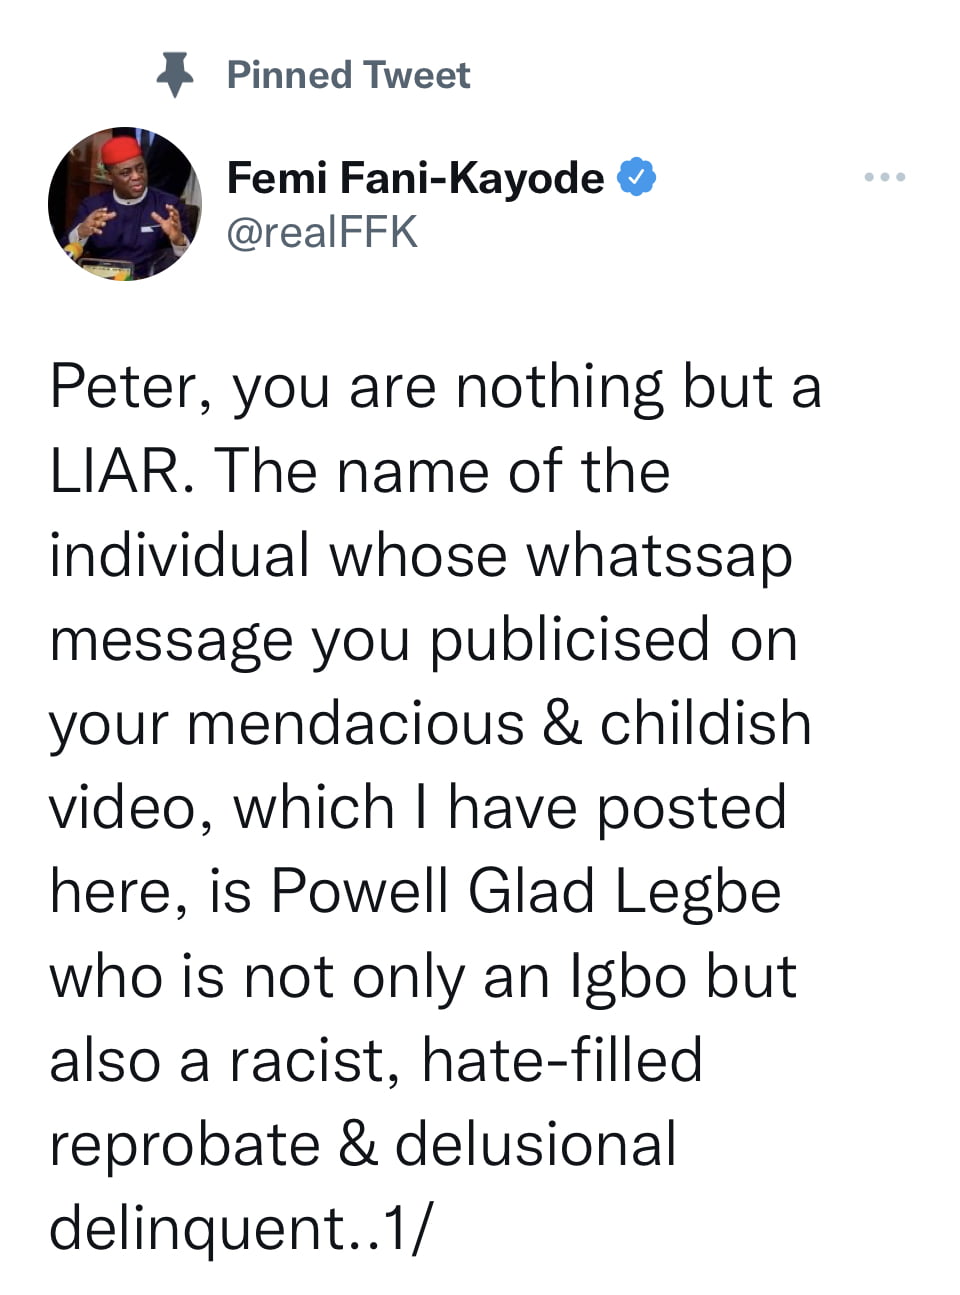 You can't win even 10% of vote in any state - FFK rains insults on Peter Obi over his comments on Tinubu